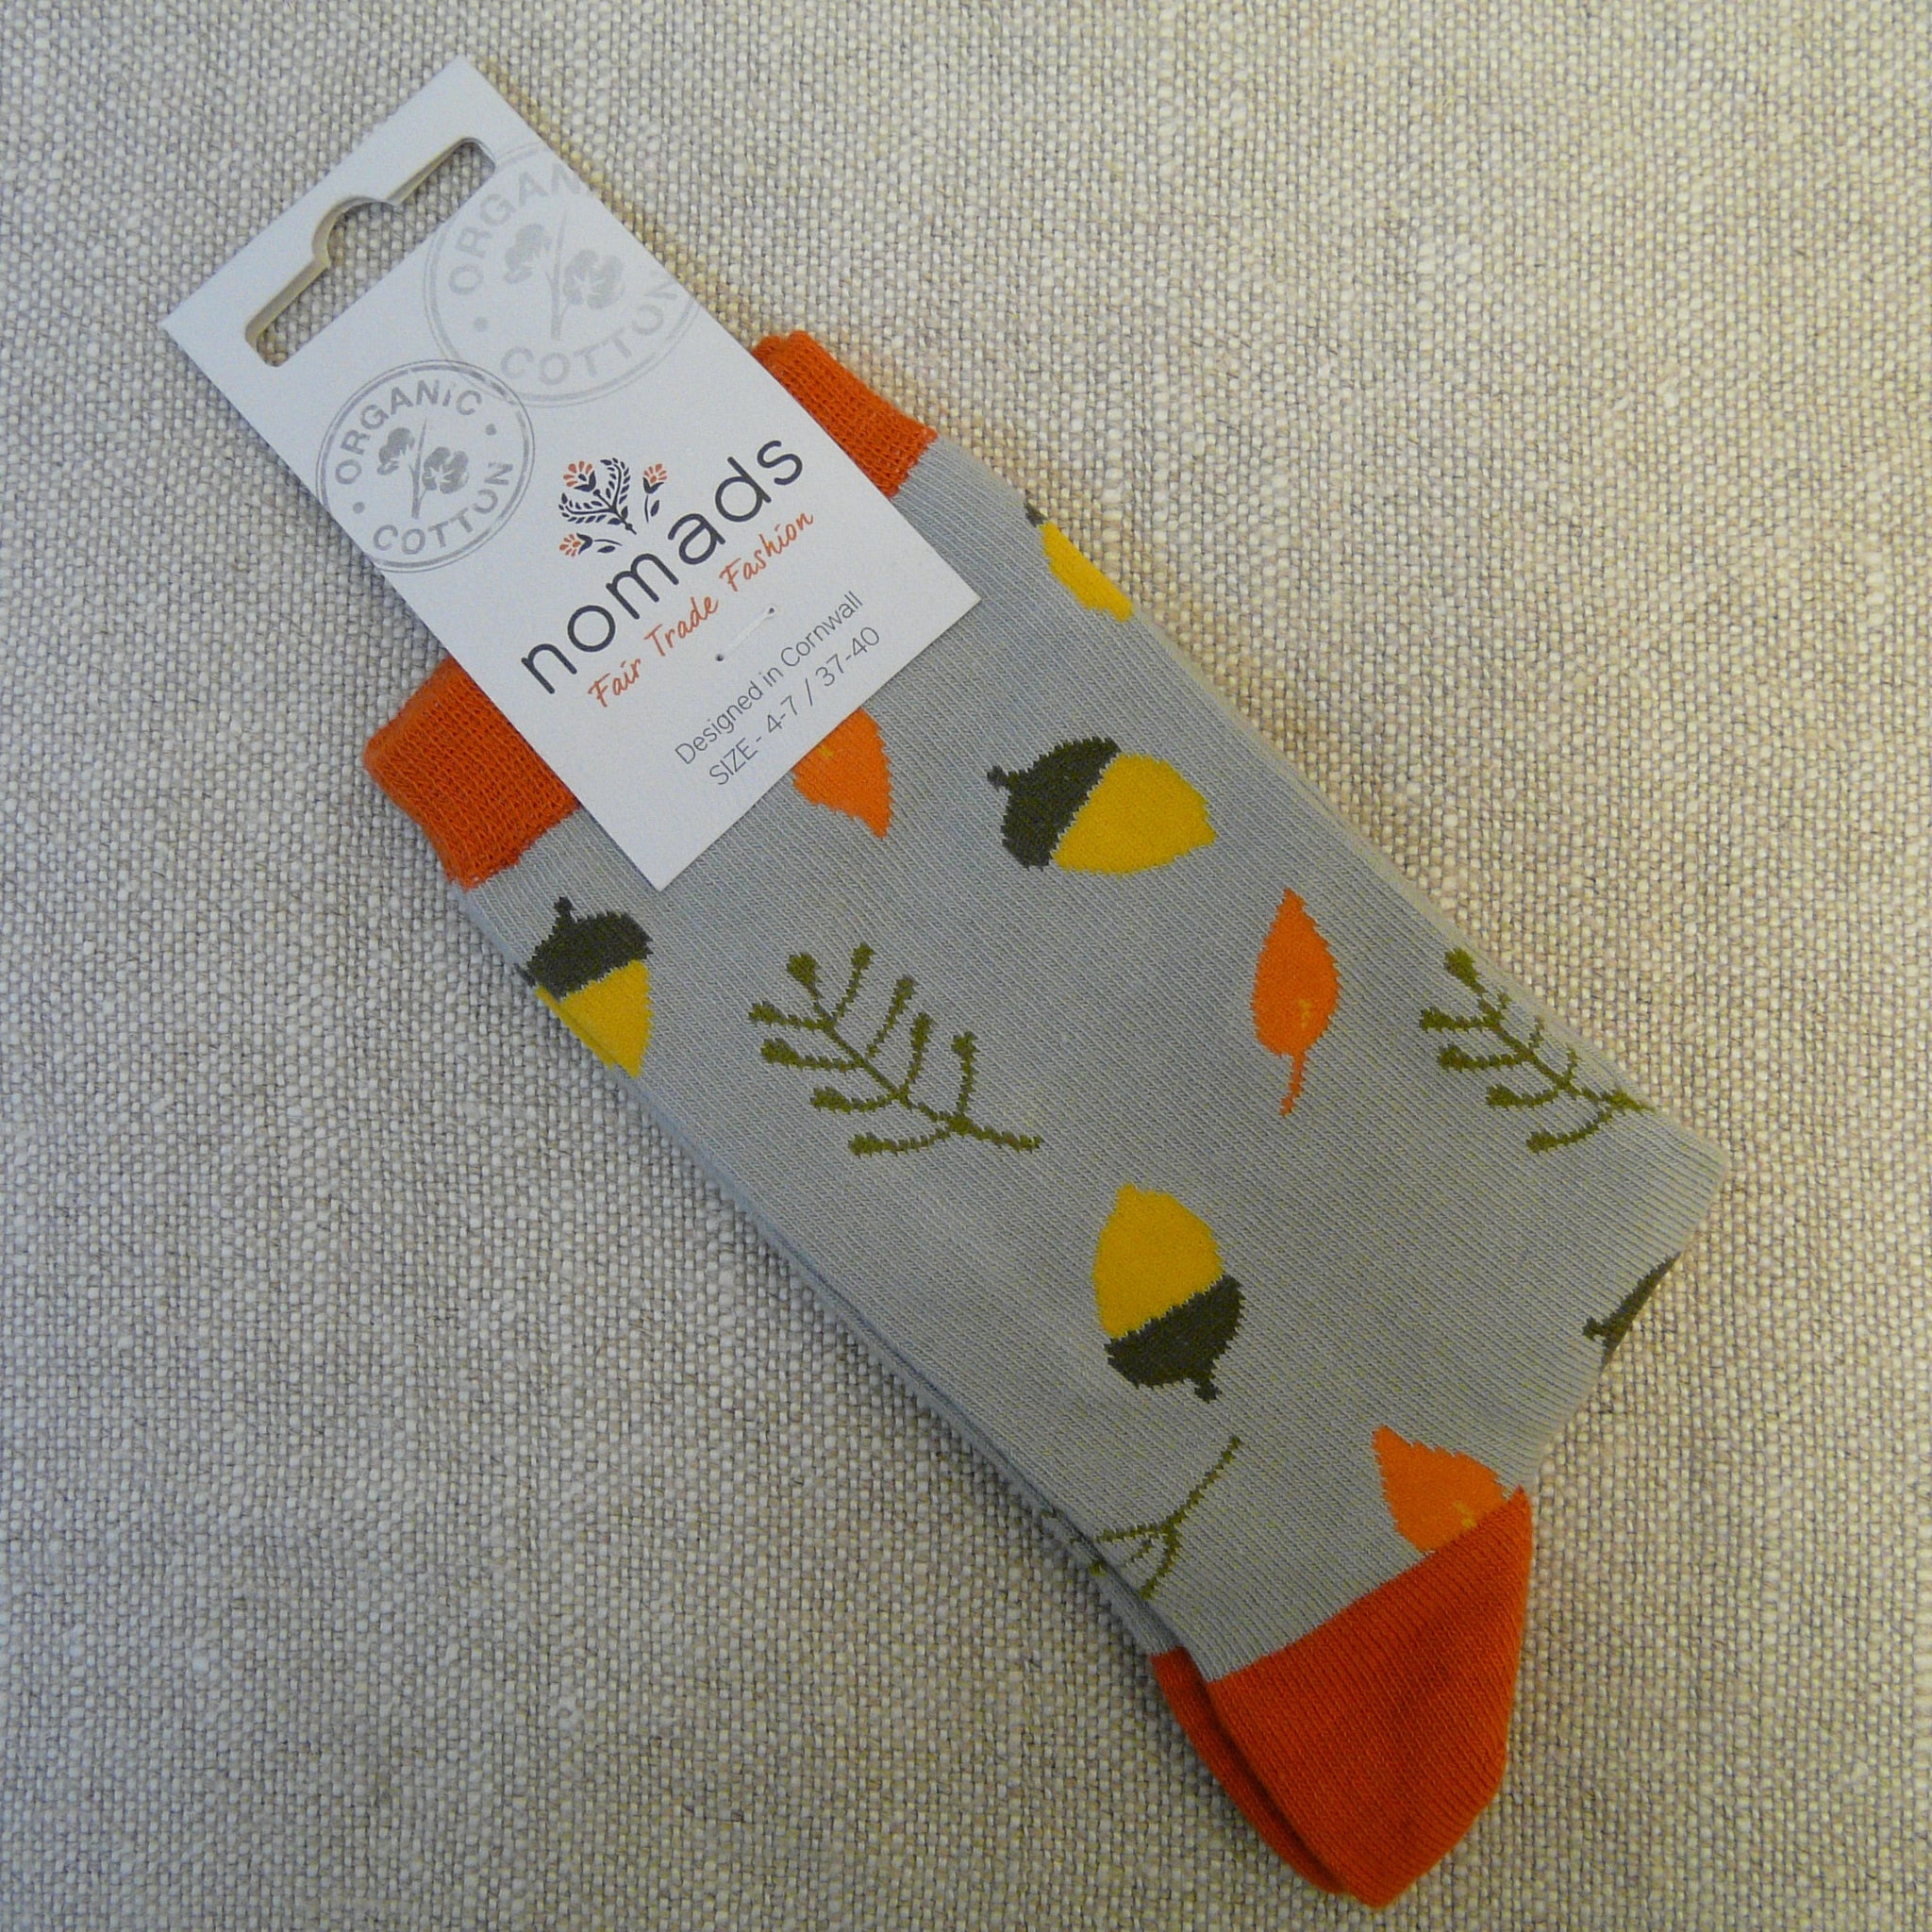 P1130727-Organic-Cotton-socks-4-7-Acorn-on-grey-front.-Grey-socks-decorated-with-yellow-acorns-in-brown-cups,-pale-orange-leaves-and-pale-olive-green-fronds.-Orange-heals-orange-stretch-tops.